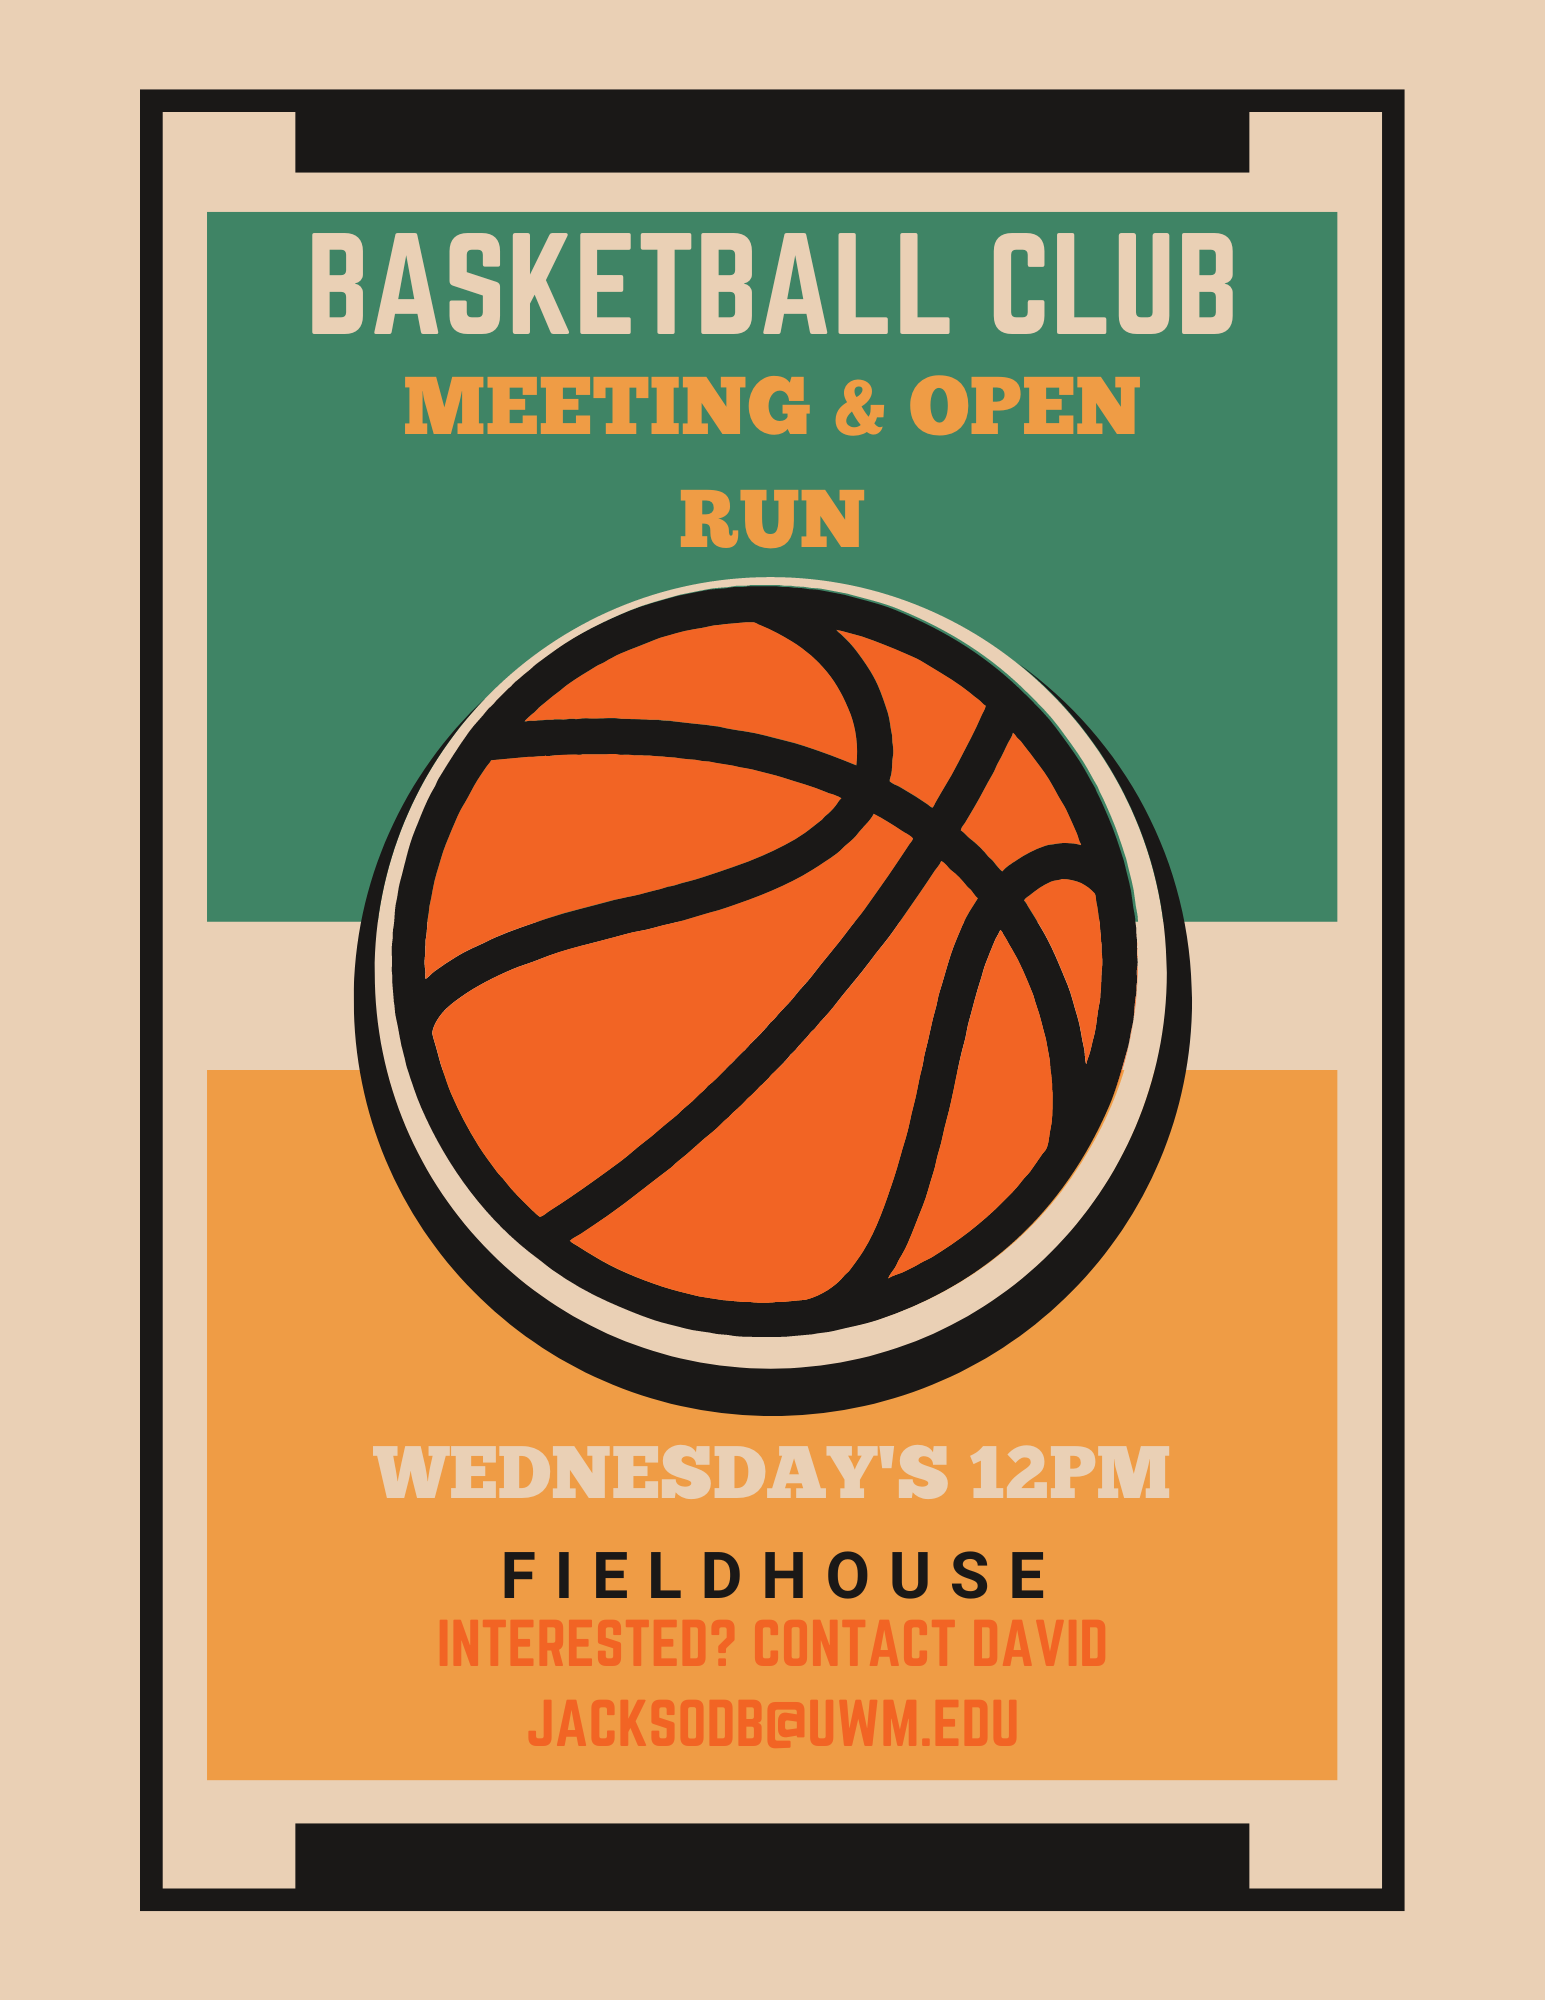 Details For Event 23648 – Basketball Club Meeting/Open Run